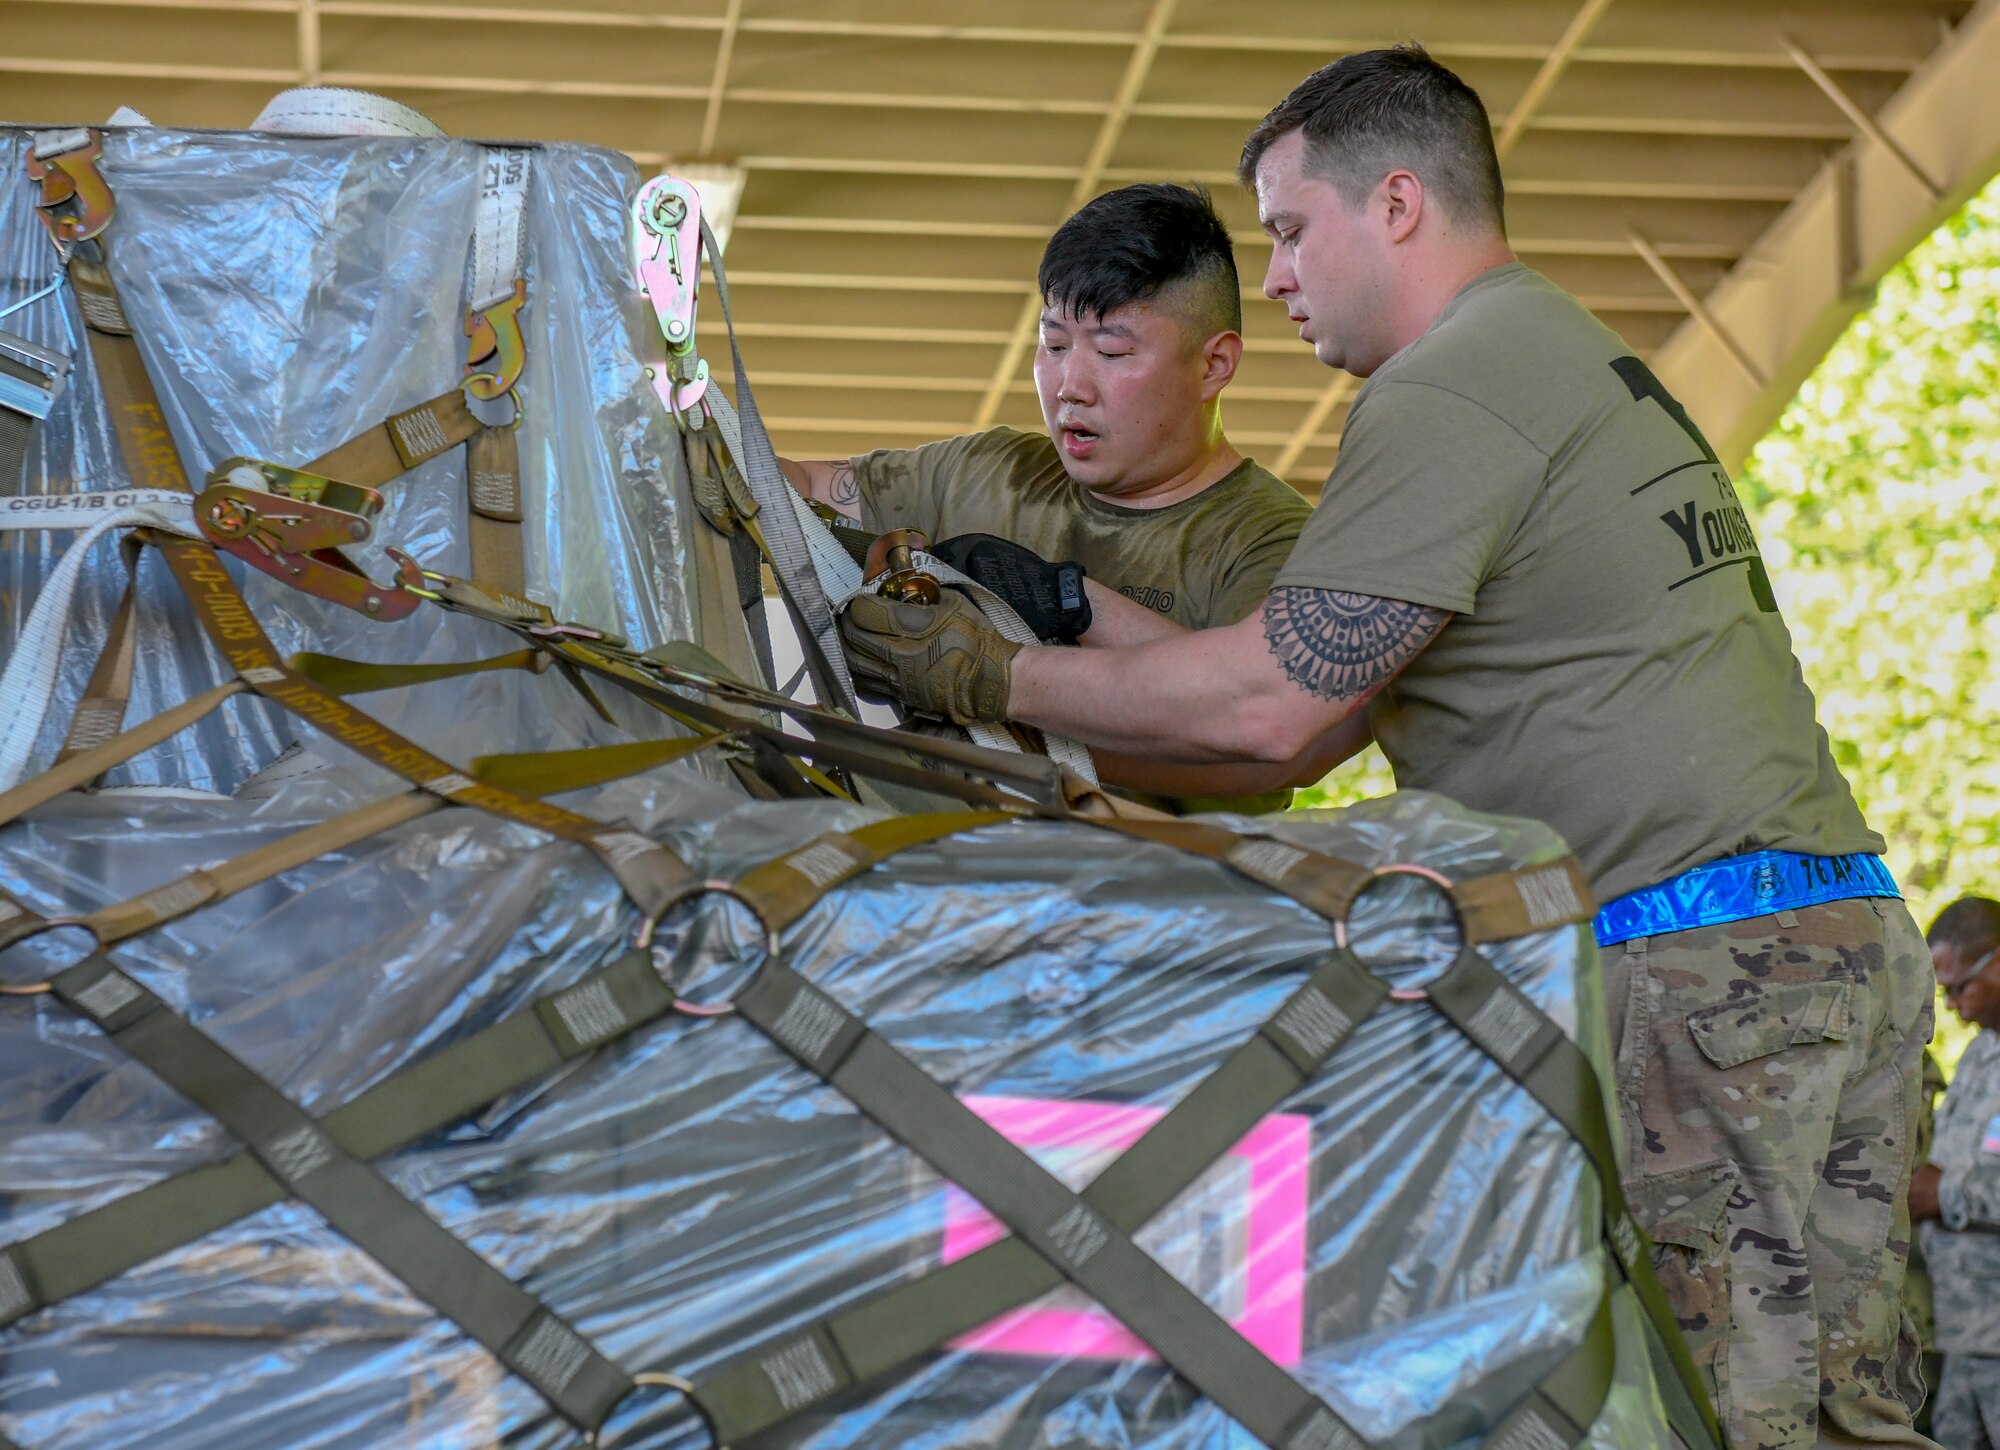 Master Sgt. Tae Choe (left), a ramp services supervisor, Master Sgt. Zach Dunkin (right), NCO in charge of load planning, and Tech. Sgt. Michael Nippers Jr. (right), all assigned to the 76th Aerial Port Squadron, tie down cargo for the pallet build-up event at the Port Dawg Challenge April 24, 2019.